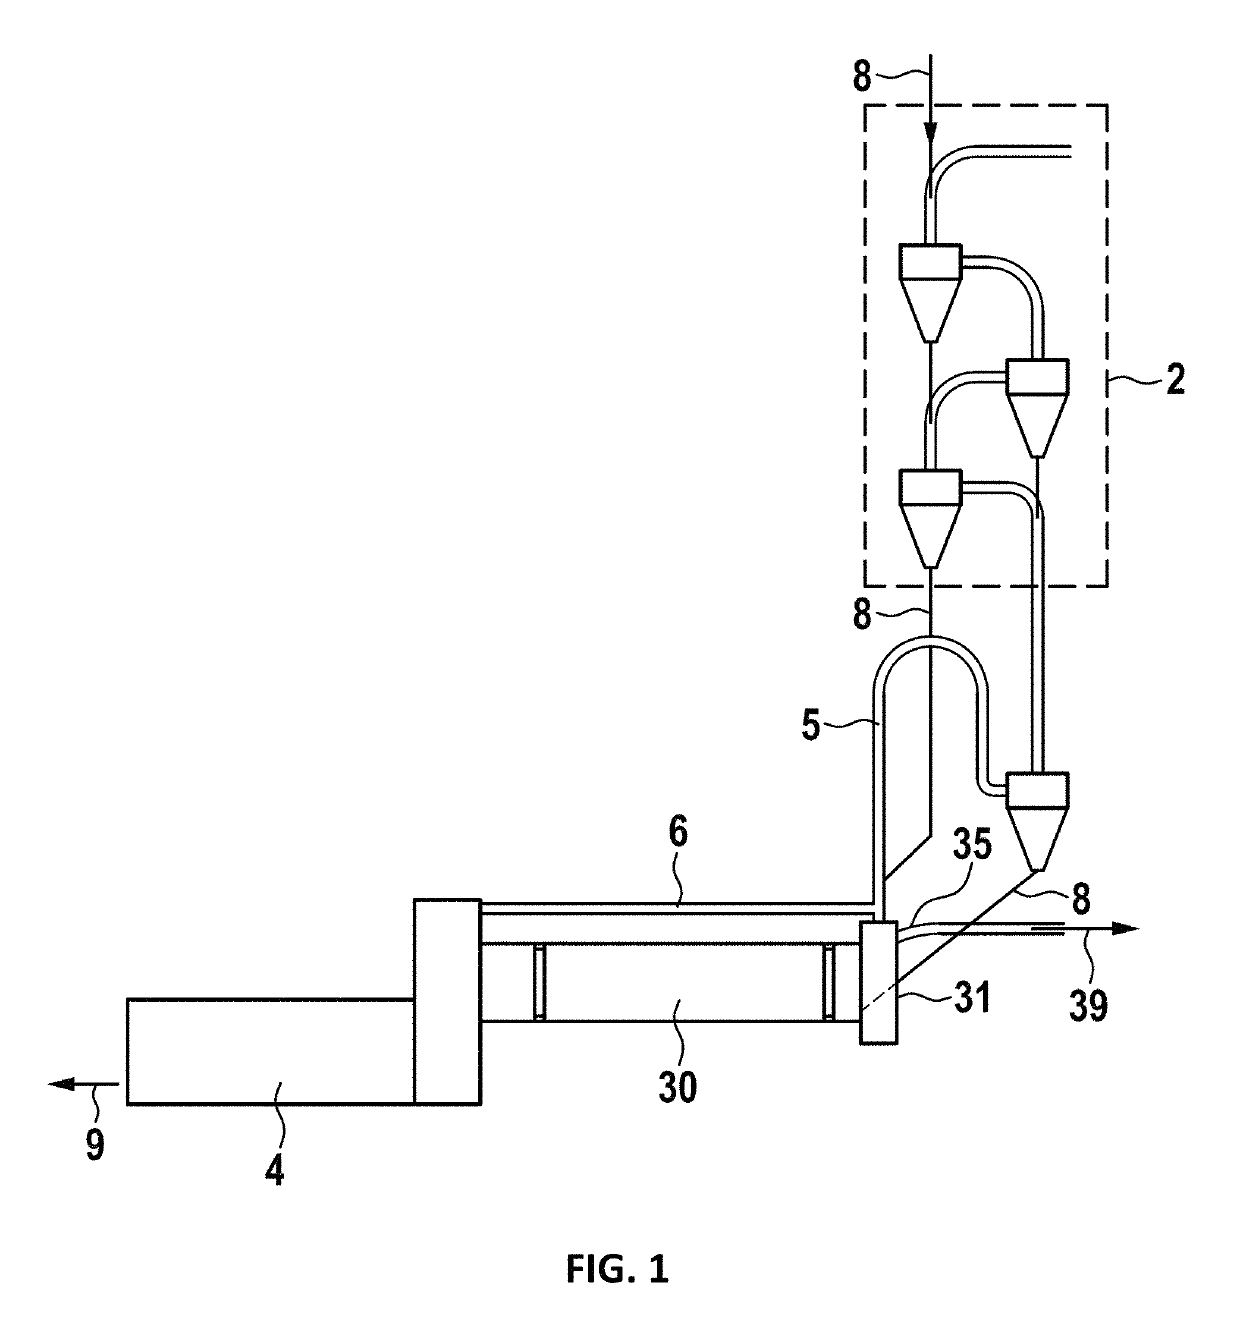 Method and apparatus for producing cement clinker